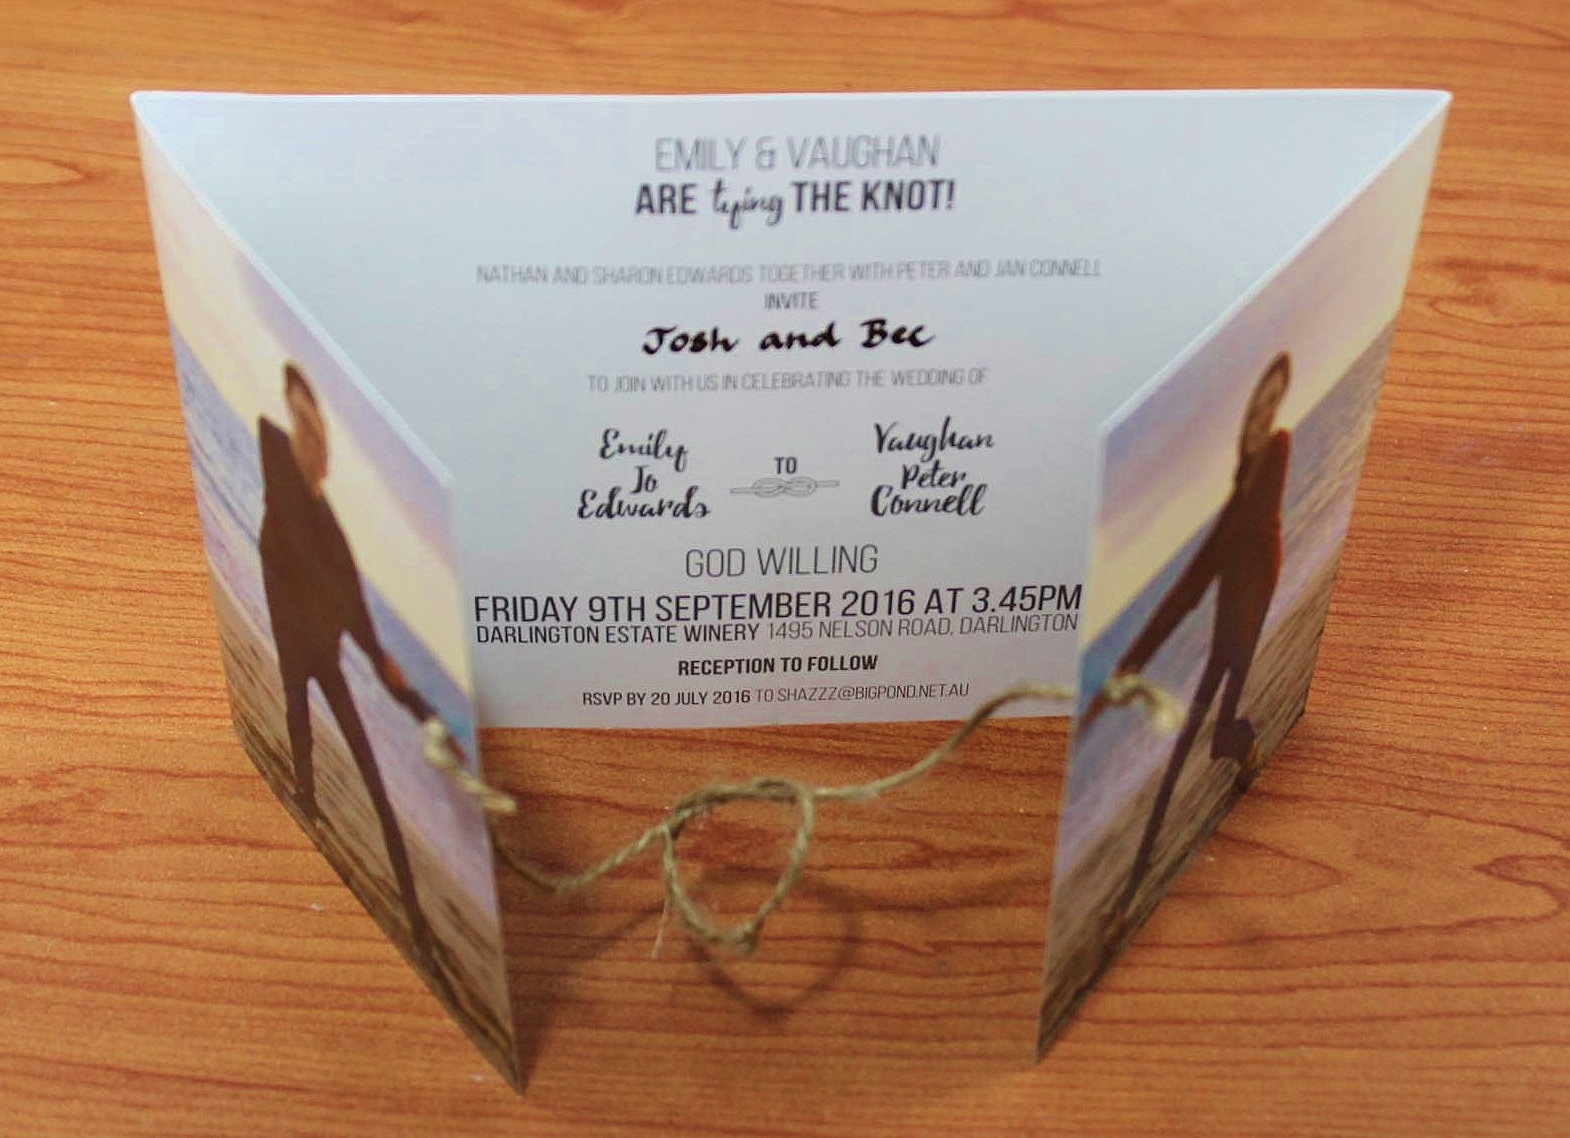 Tying the Knot Wedding Invitation Awesome Tie the Knot with these Wedding Invitations